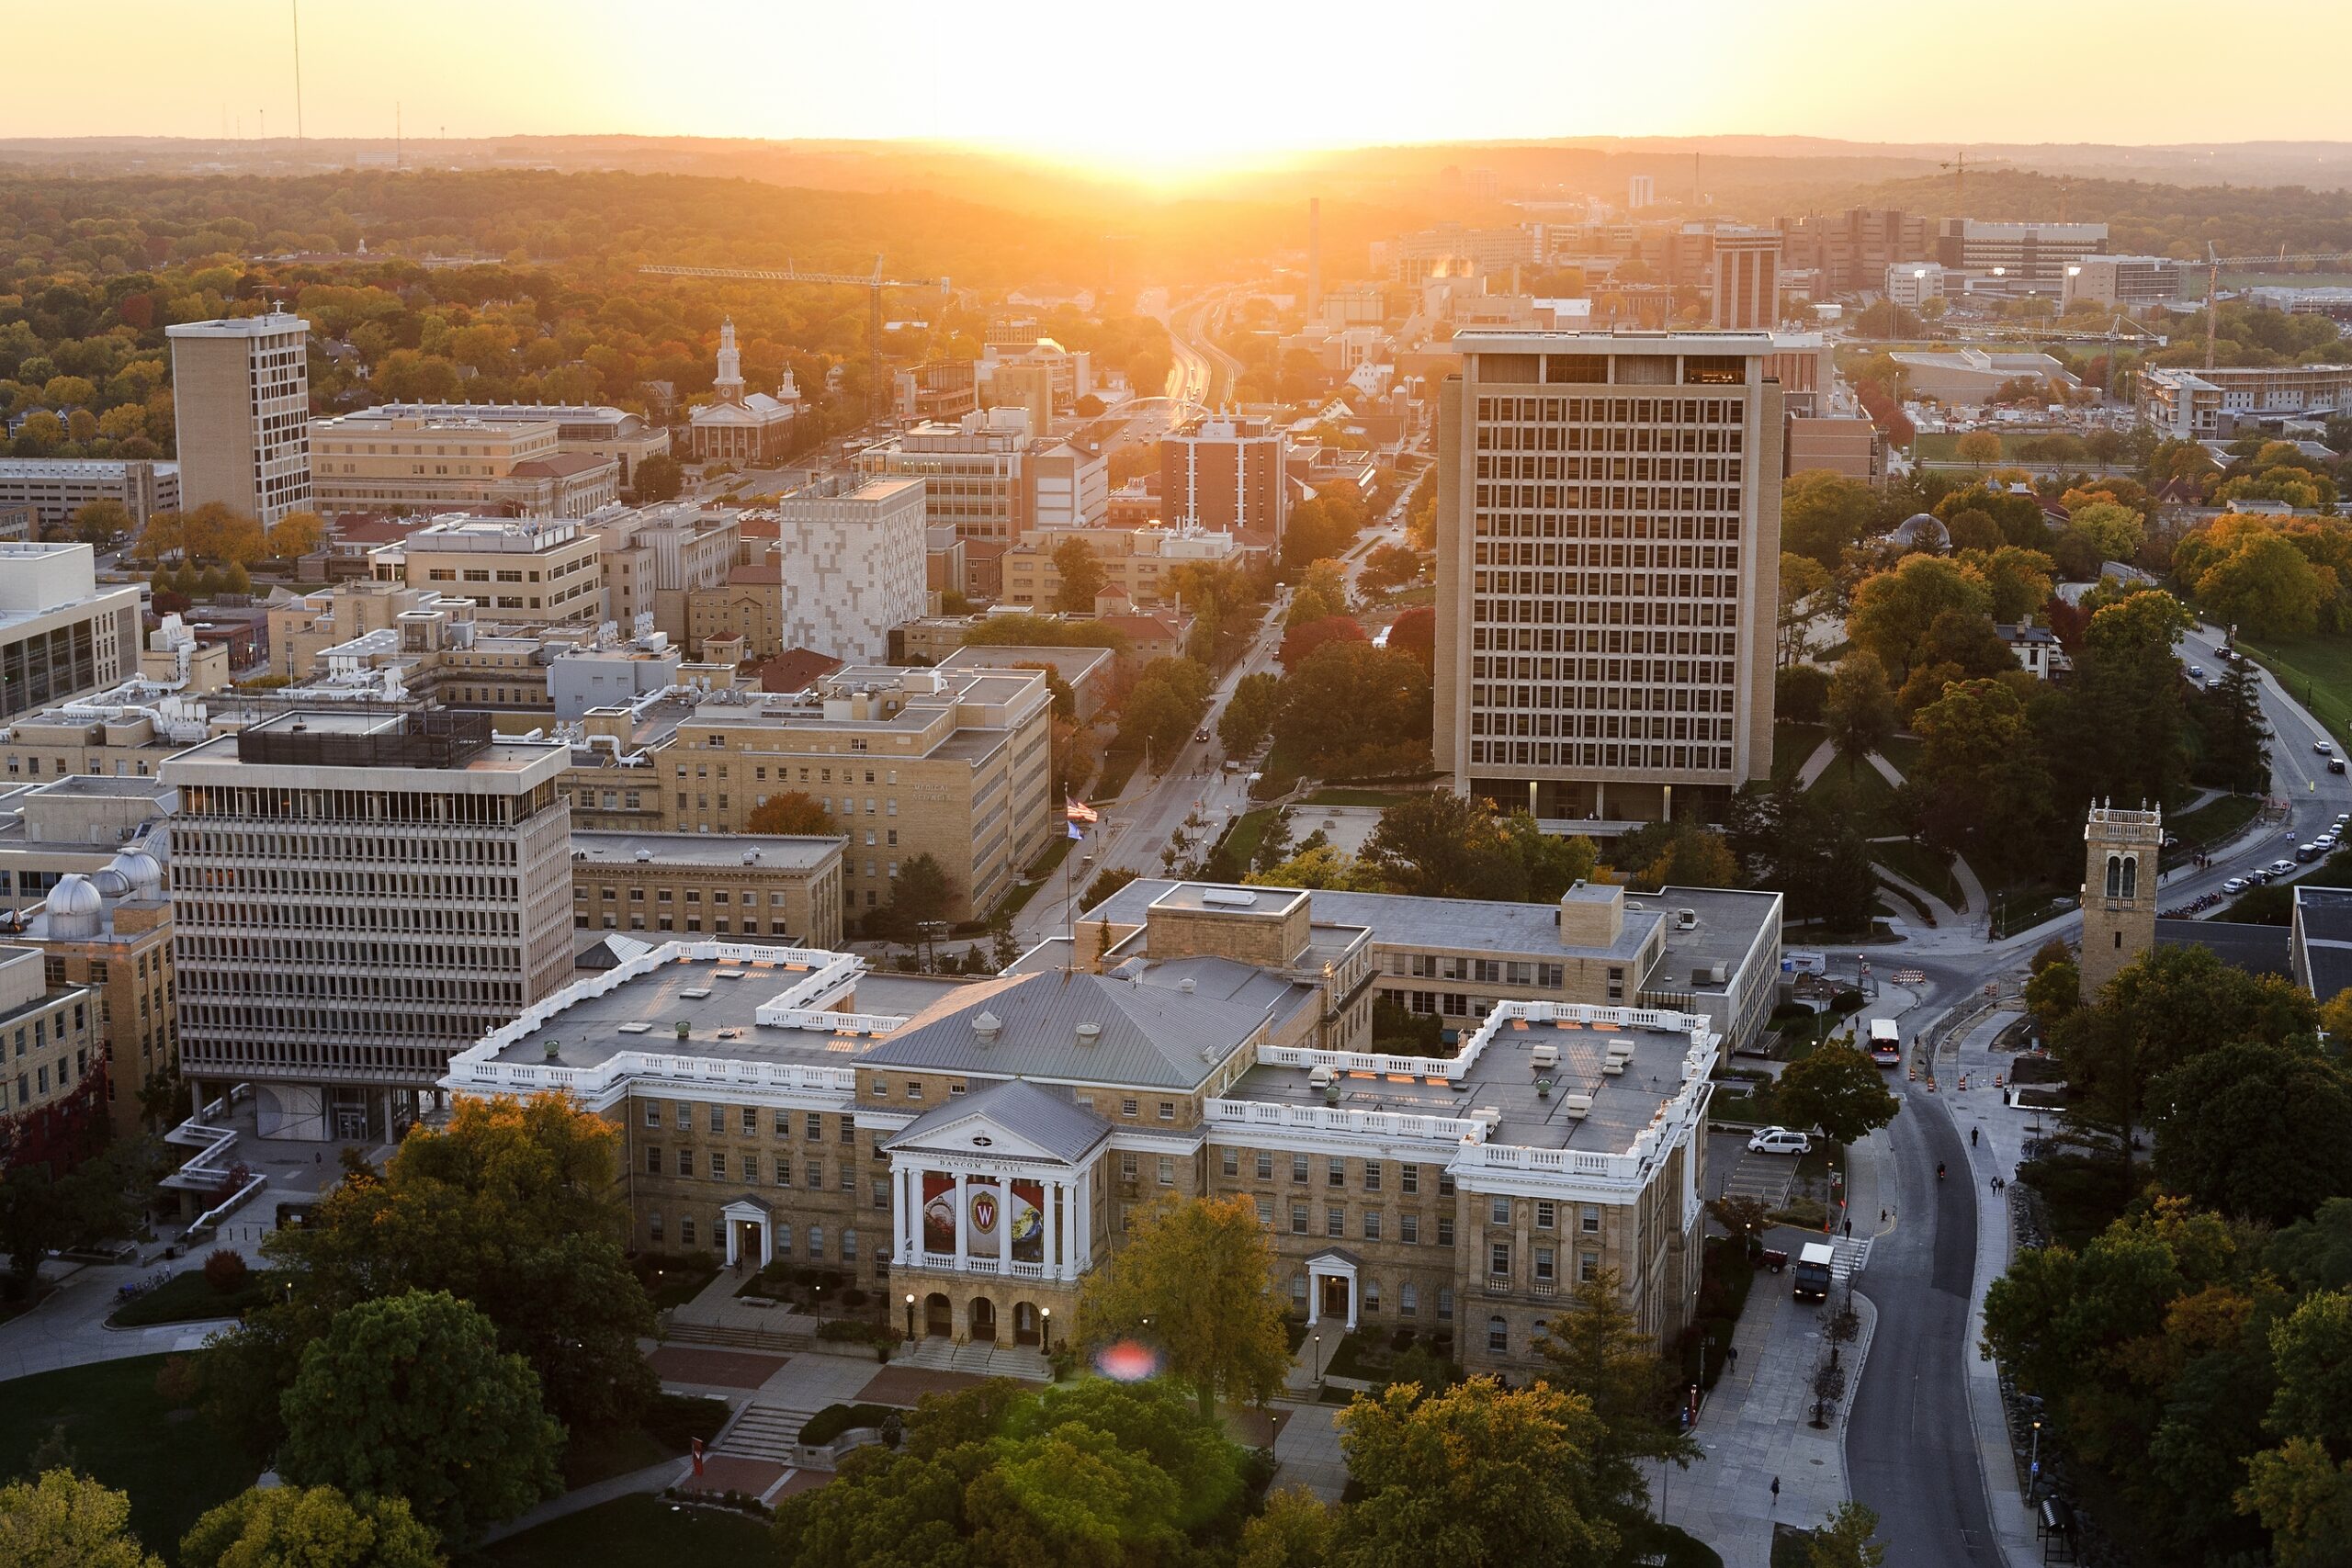 Bascom Hall is pictured in an aerial view of the University of Wisconsin-Madison campus